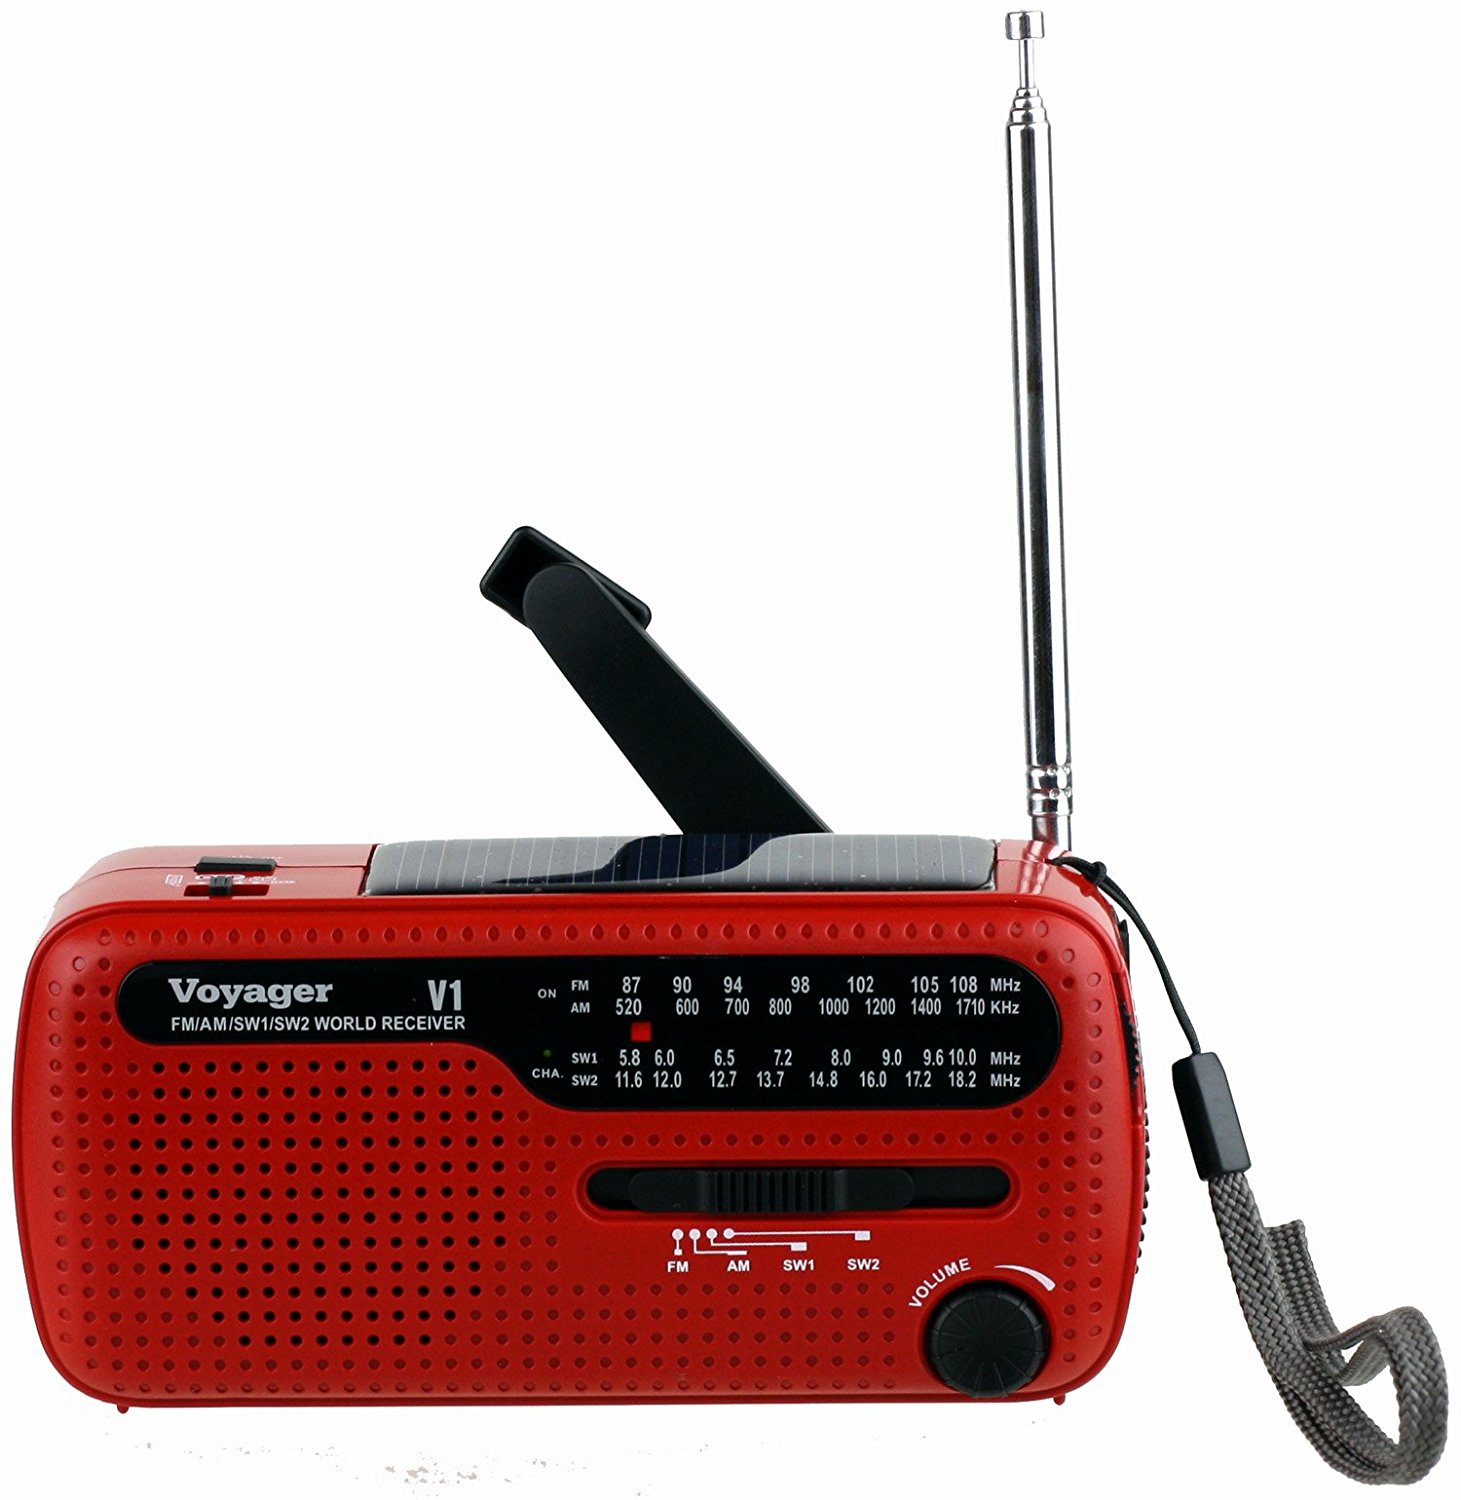 Kaito V1R Voyager Solar/Dynamo AM/FM/SW Emergency Radio with Cell Phone Charger and 3-LED Flashlight - Red - image 2 of 4